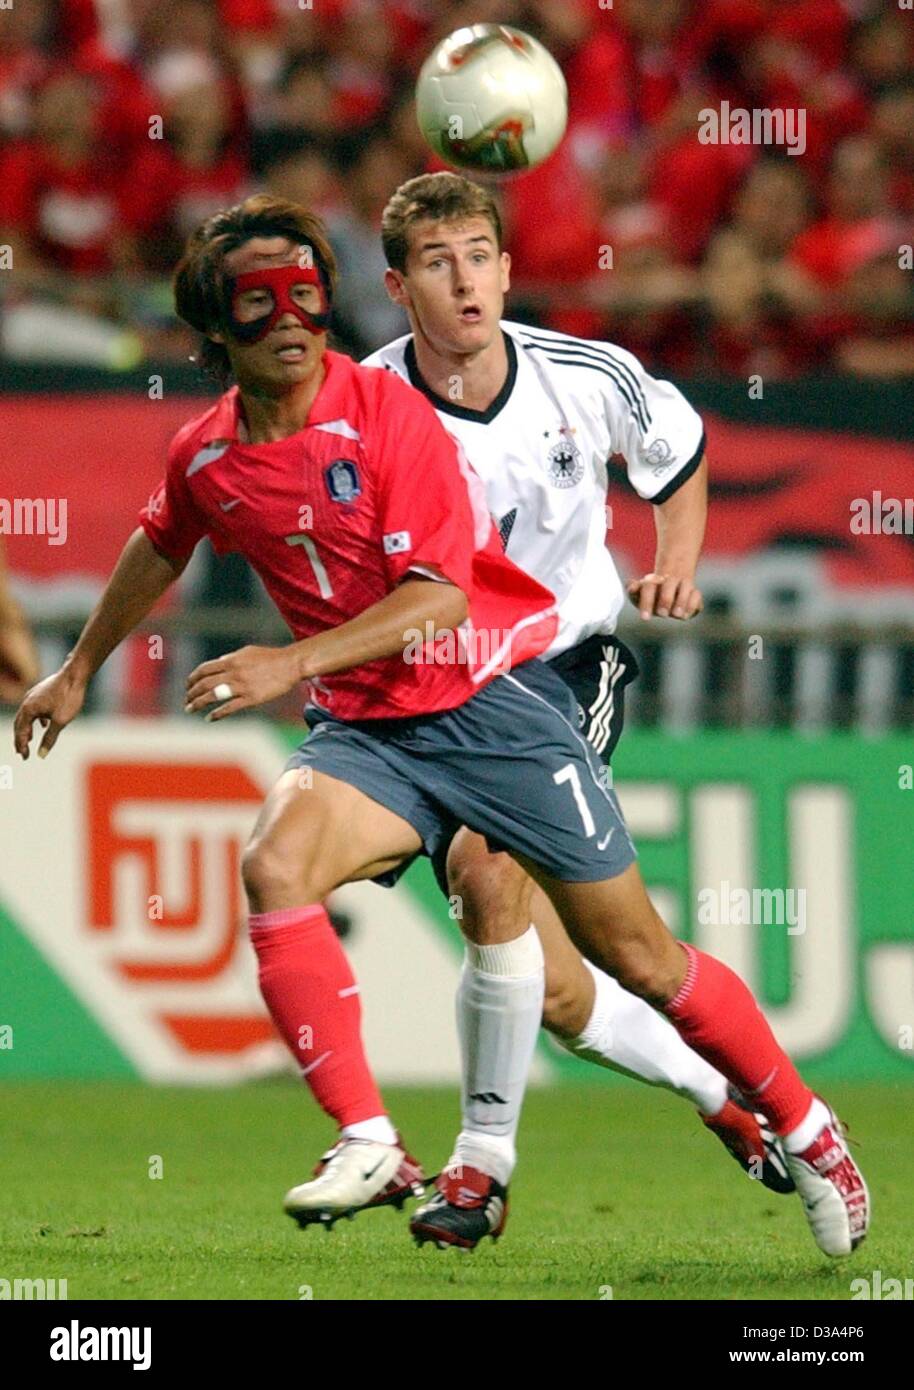 (dpa) - German striker Miroslav Klose (R) and Korean defender Kim Tae-Young both run after the ball in the semi final of the FIFA World Cup in Seoul, 25 June 2002. By beating South Korea 1:0 Germany qualified for the 7th time for the World Cup final. Stock Photo